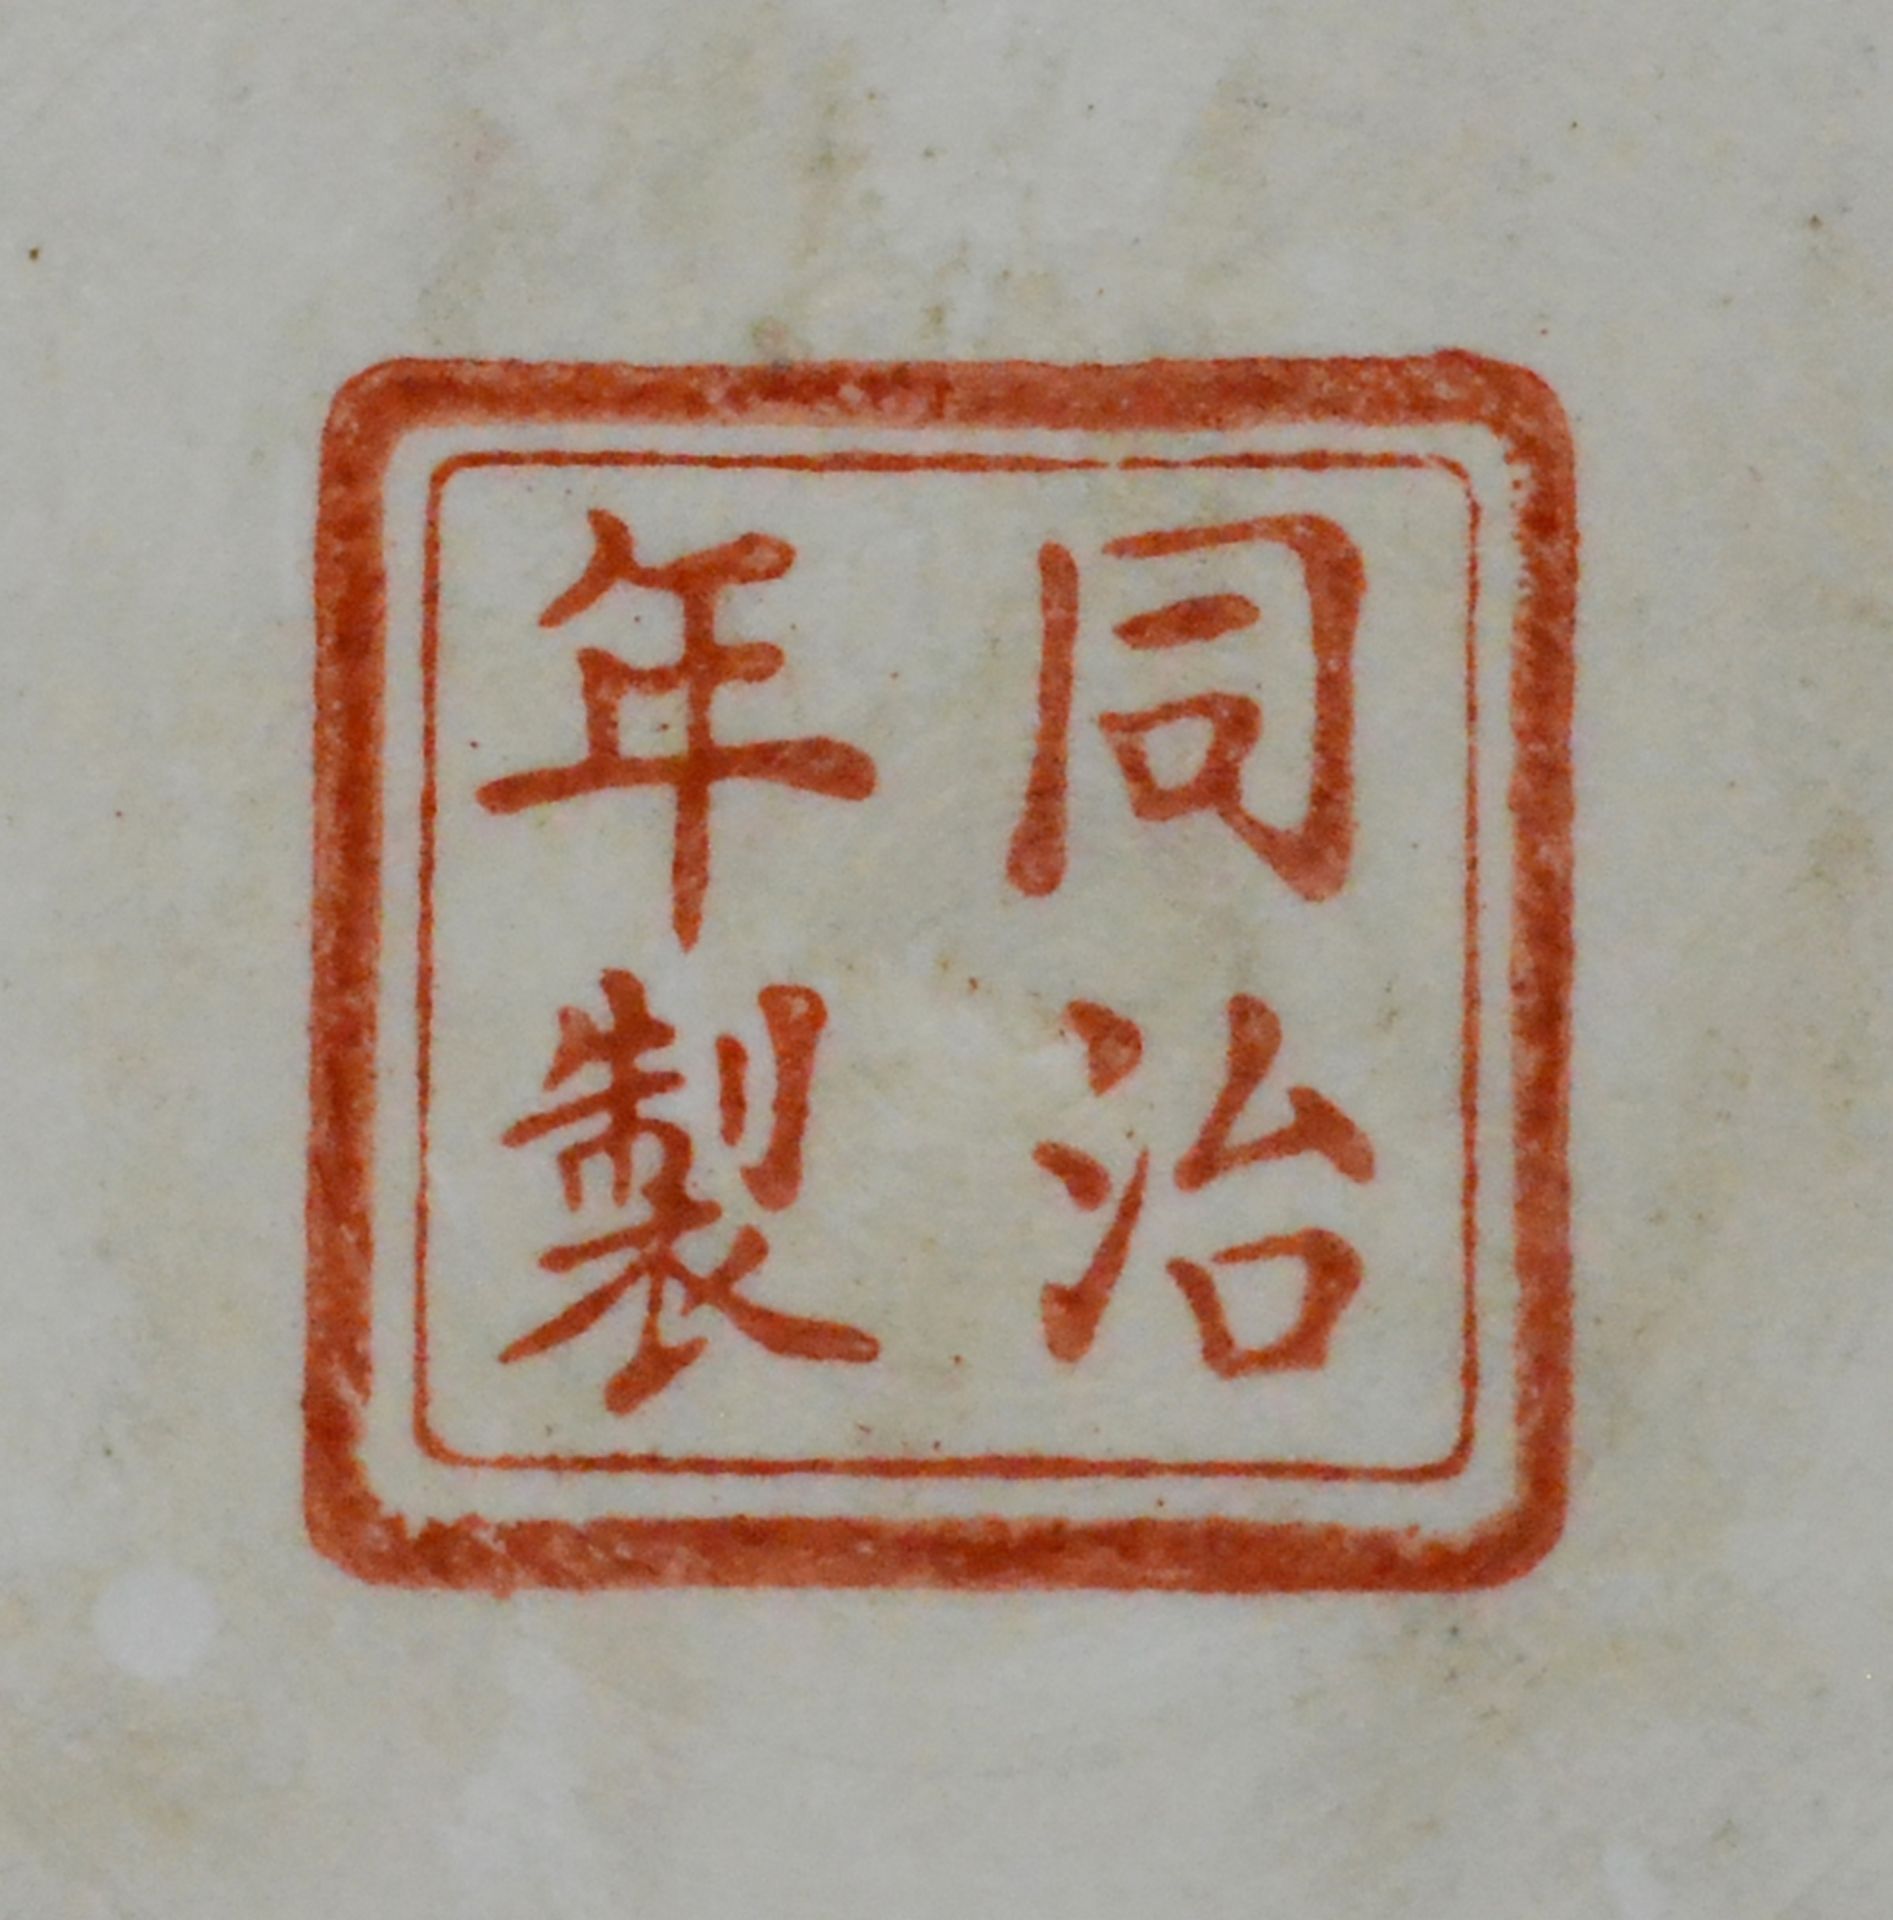 Plate, rim decorated with ornamental elements, rust red four-character mark "Tongzhi", China, - Image 2 of 2